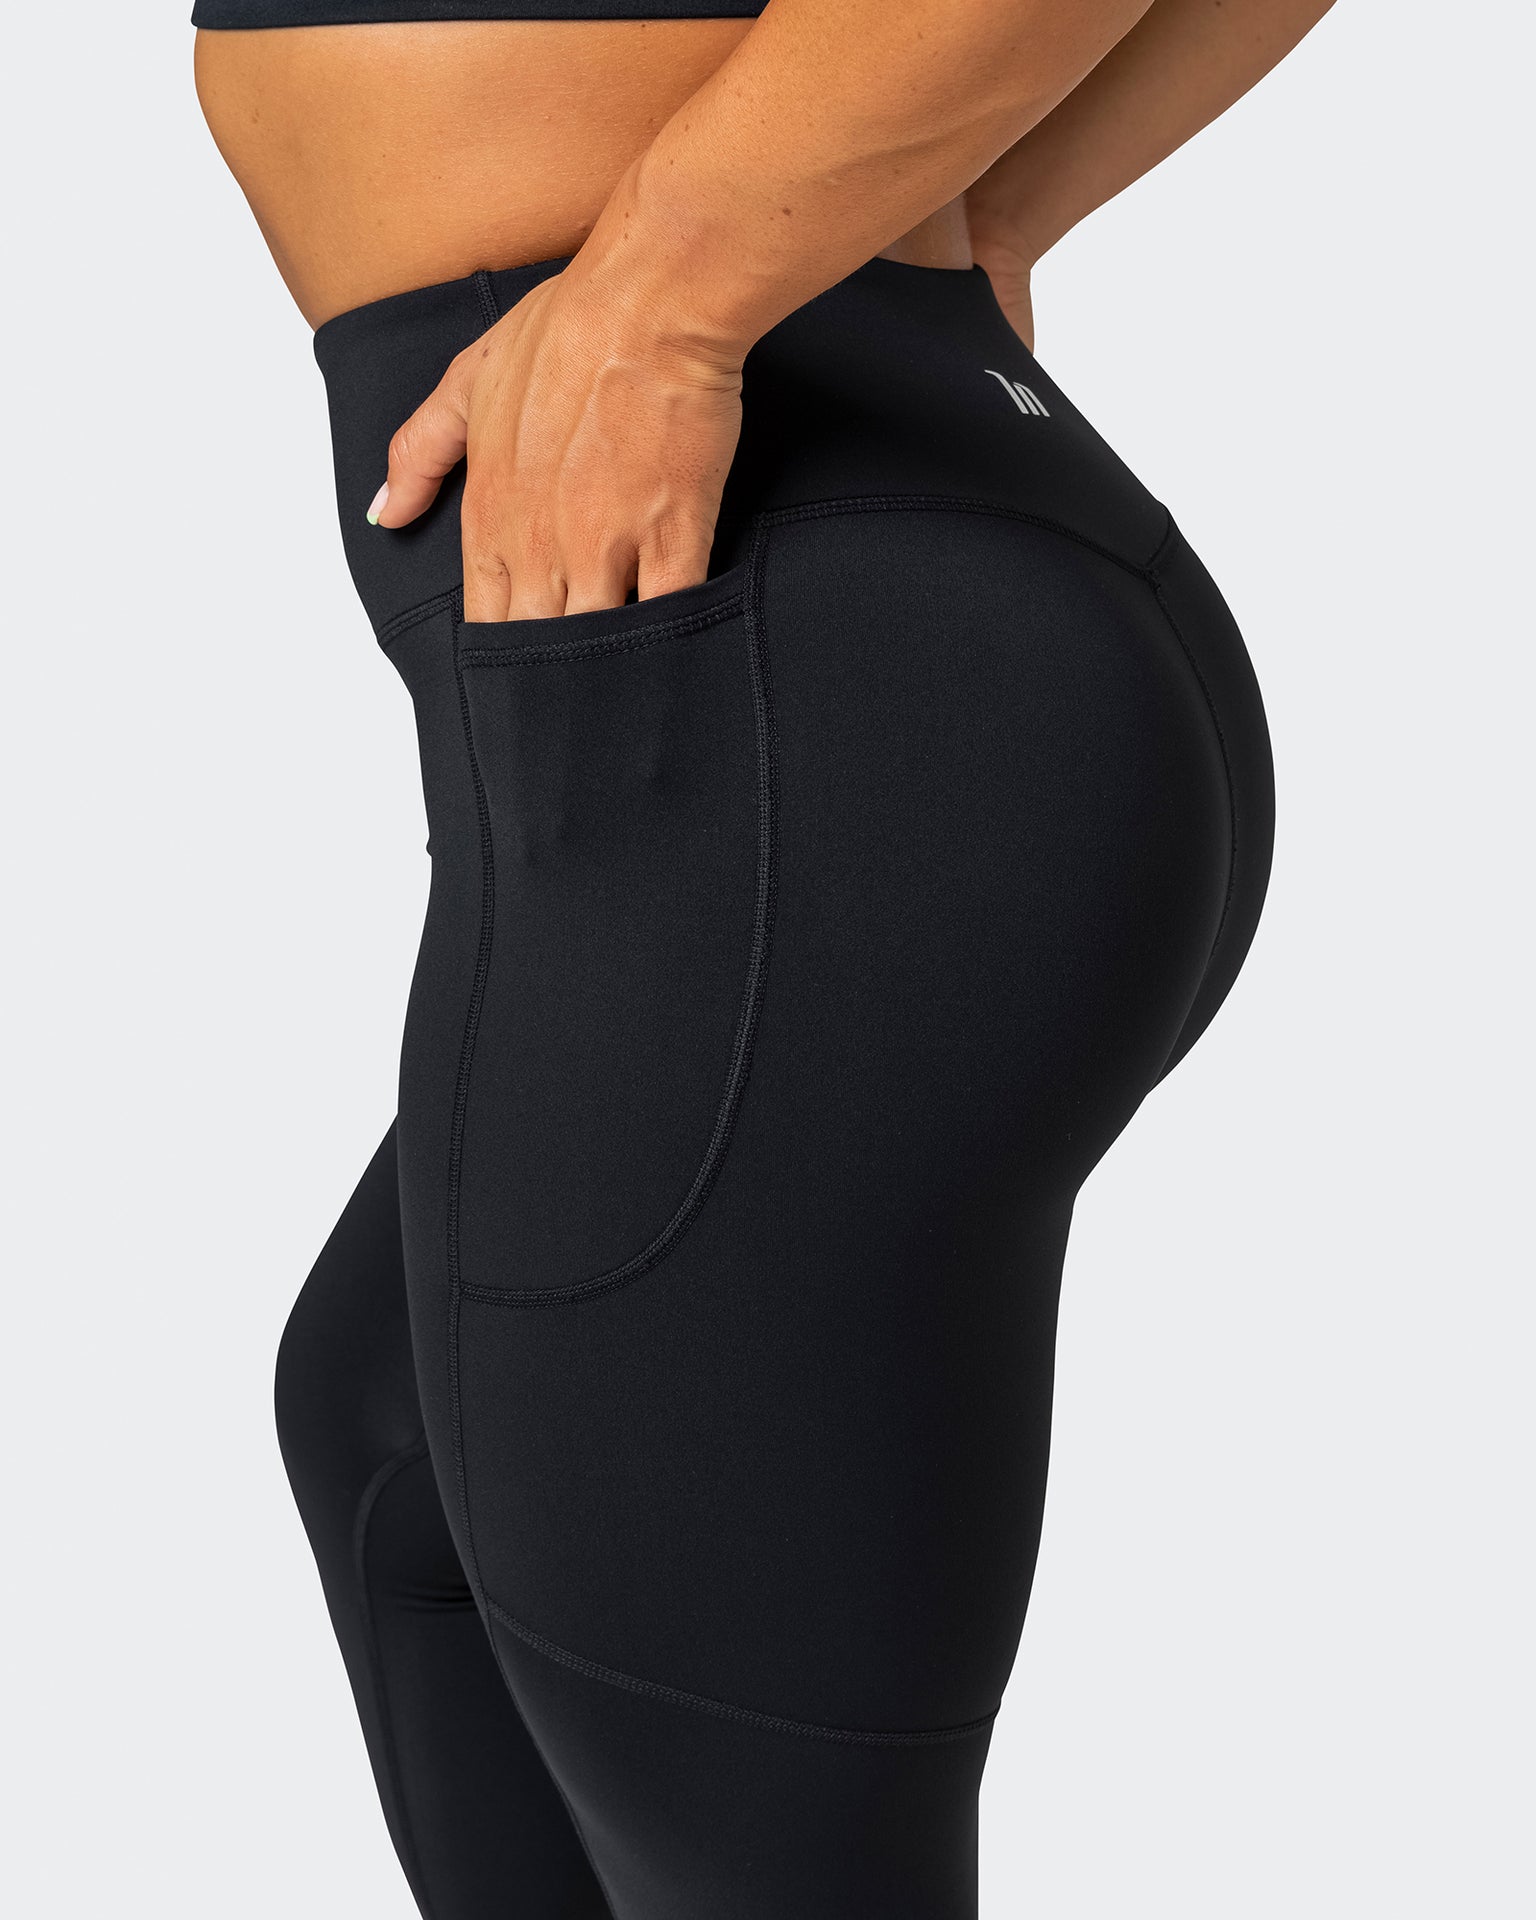 L'Academie The Pintuck Legging in Black. Size S.